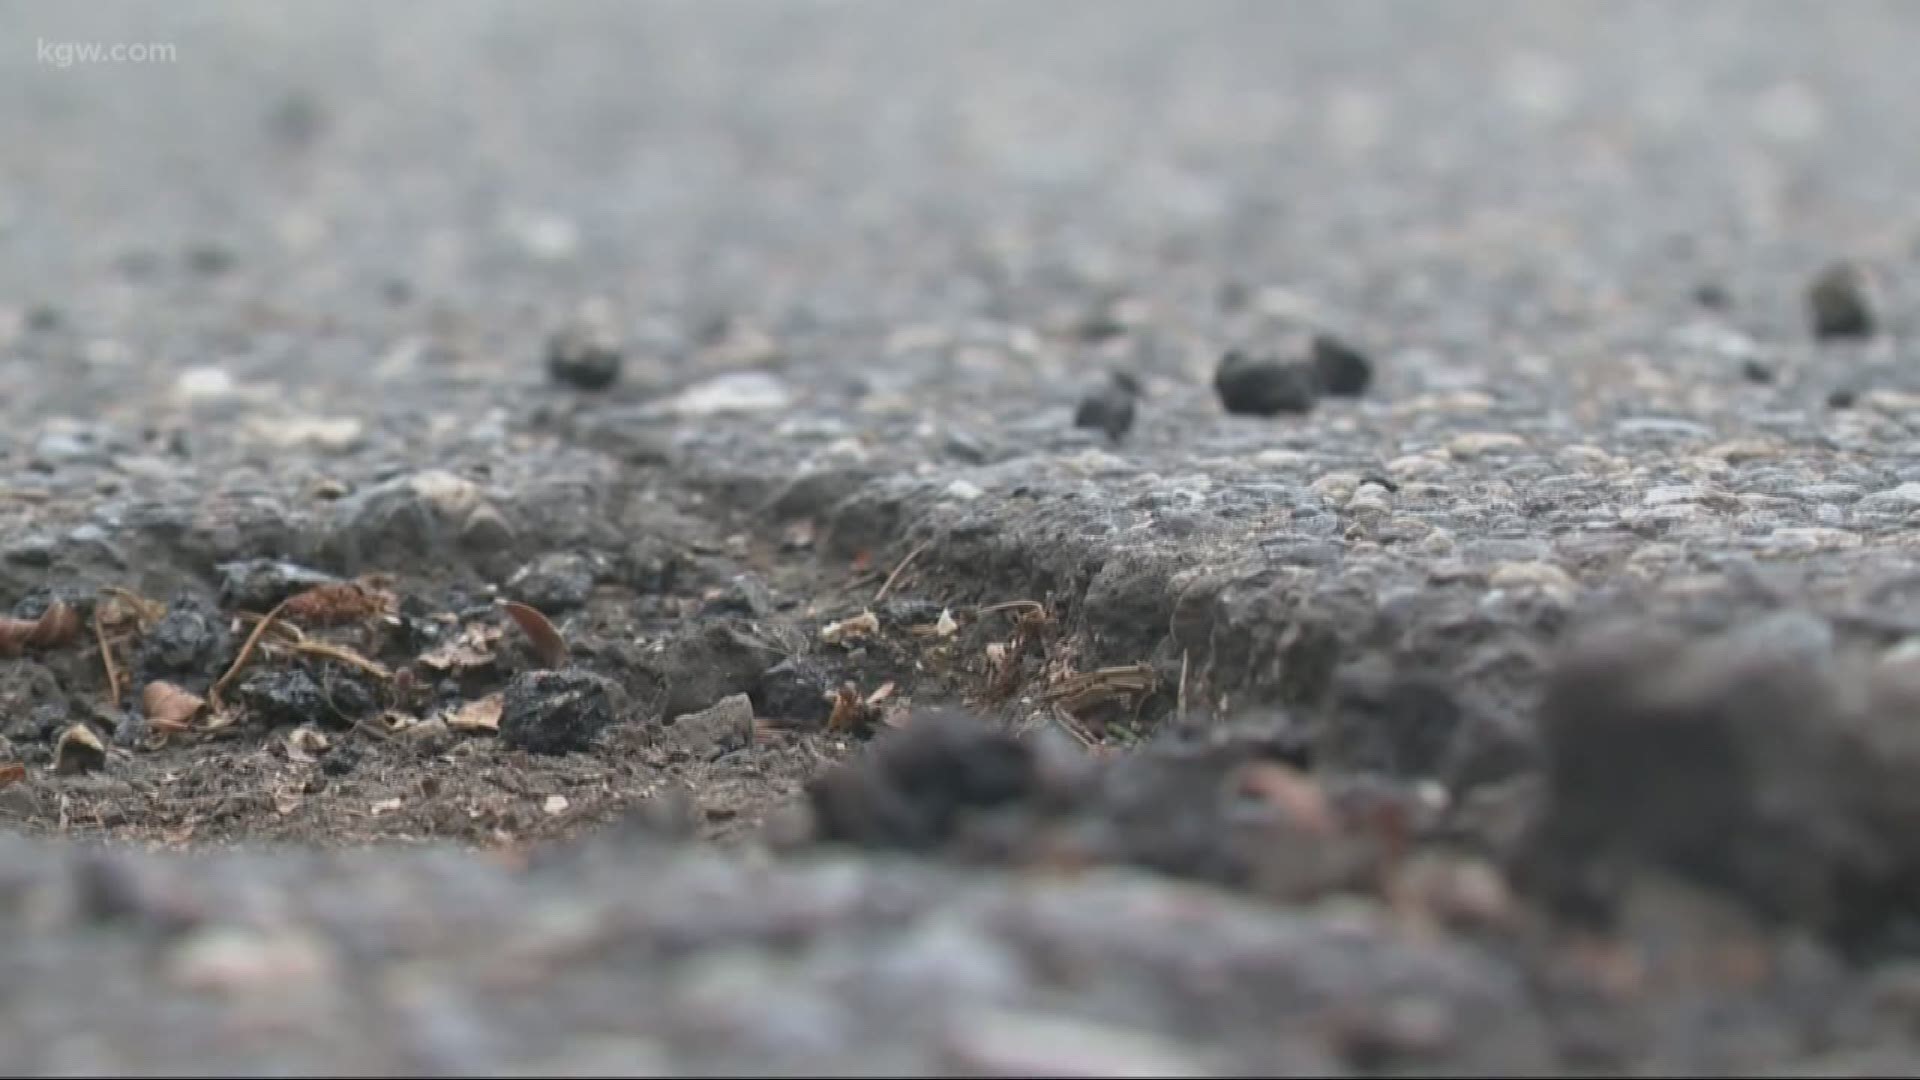 You can share your neighborhood potholes on Twitter.